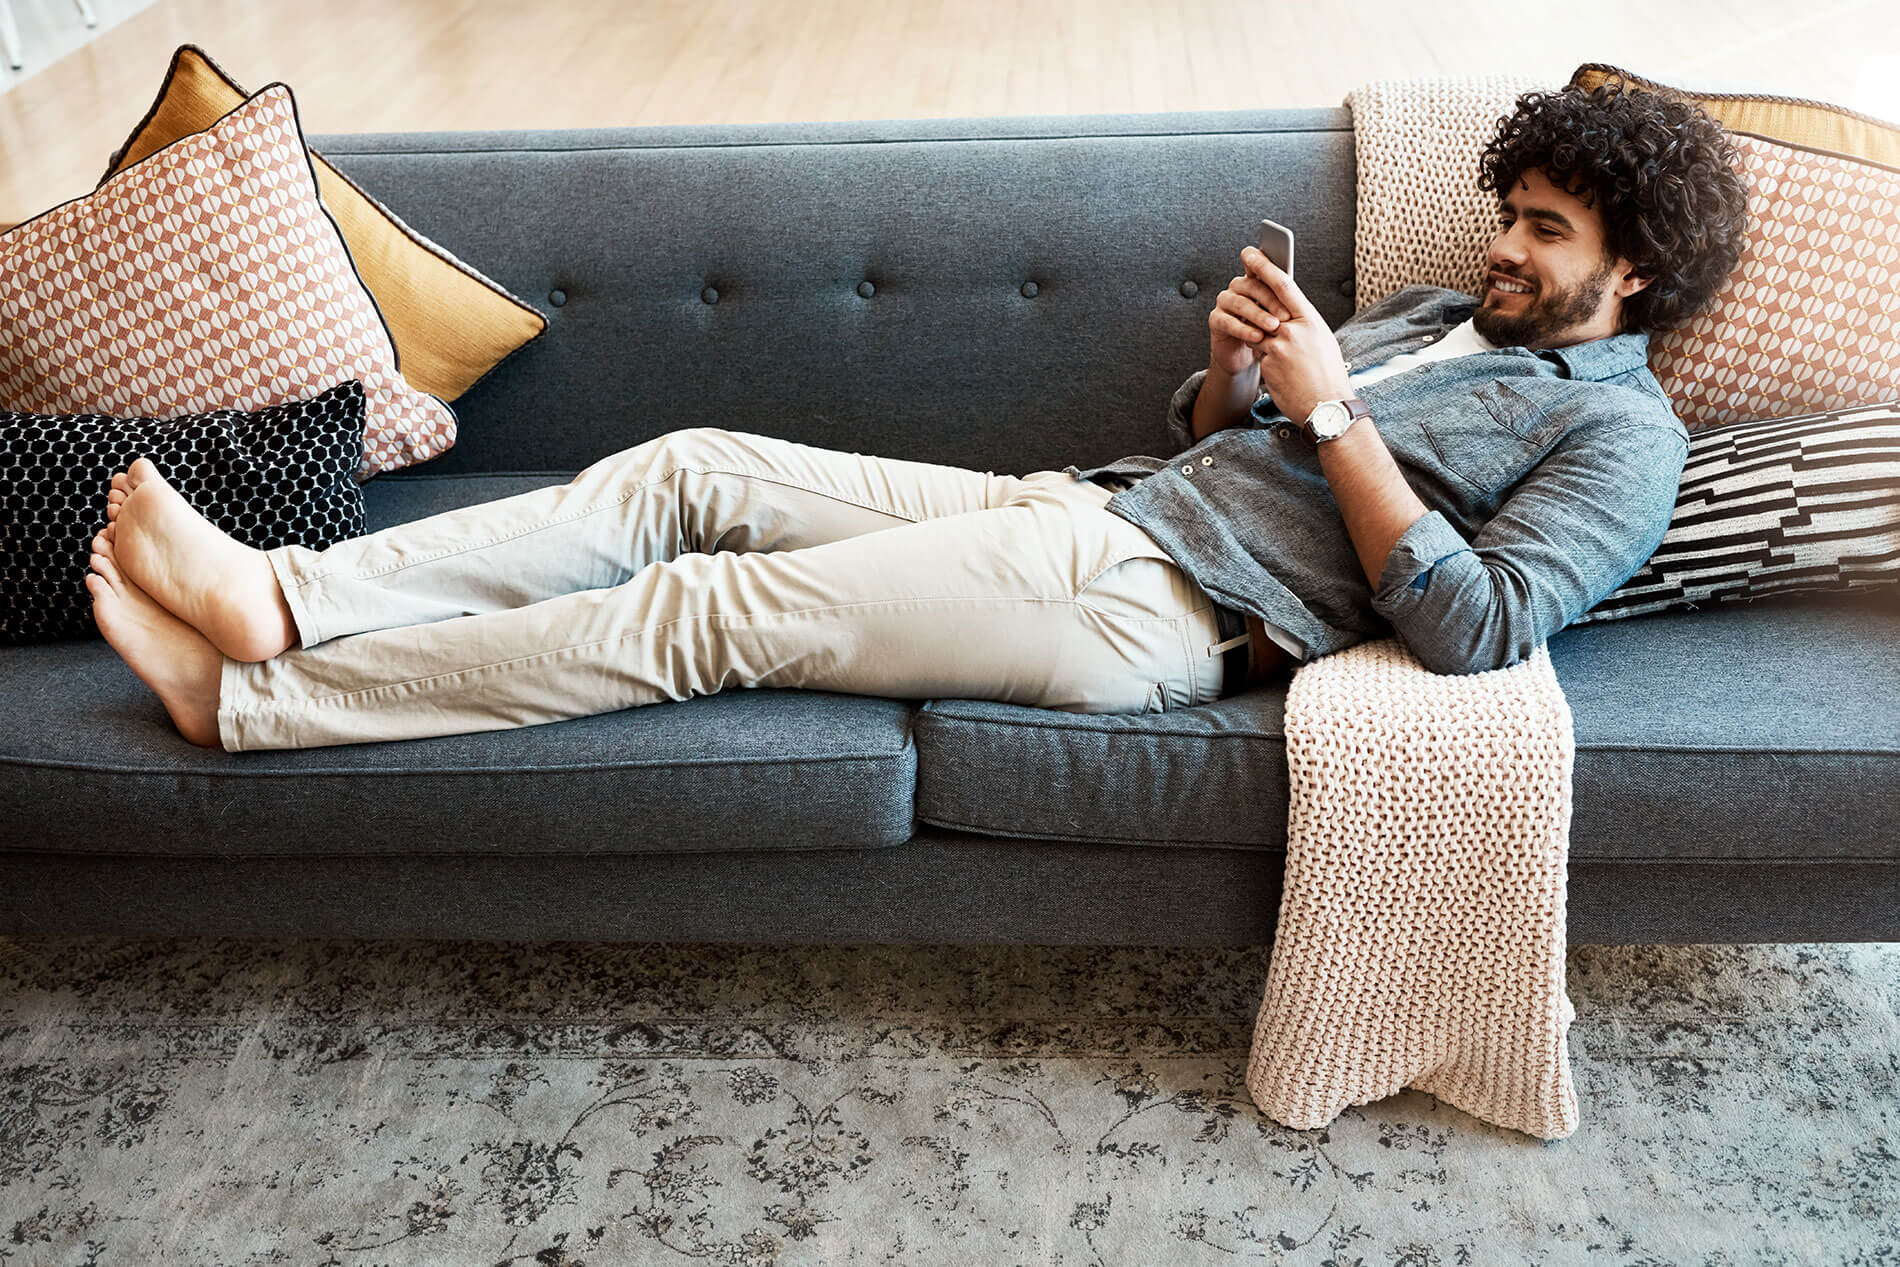 Man lounging on the couch on his phone